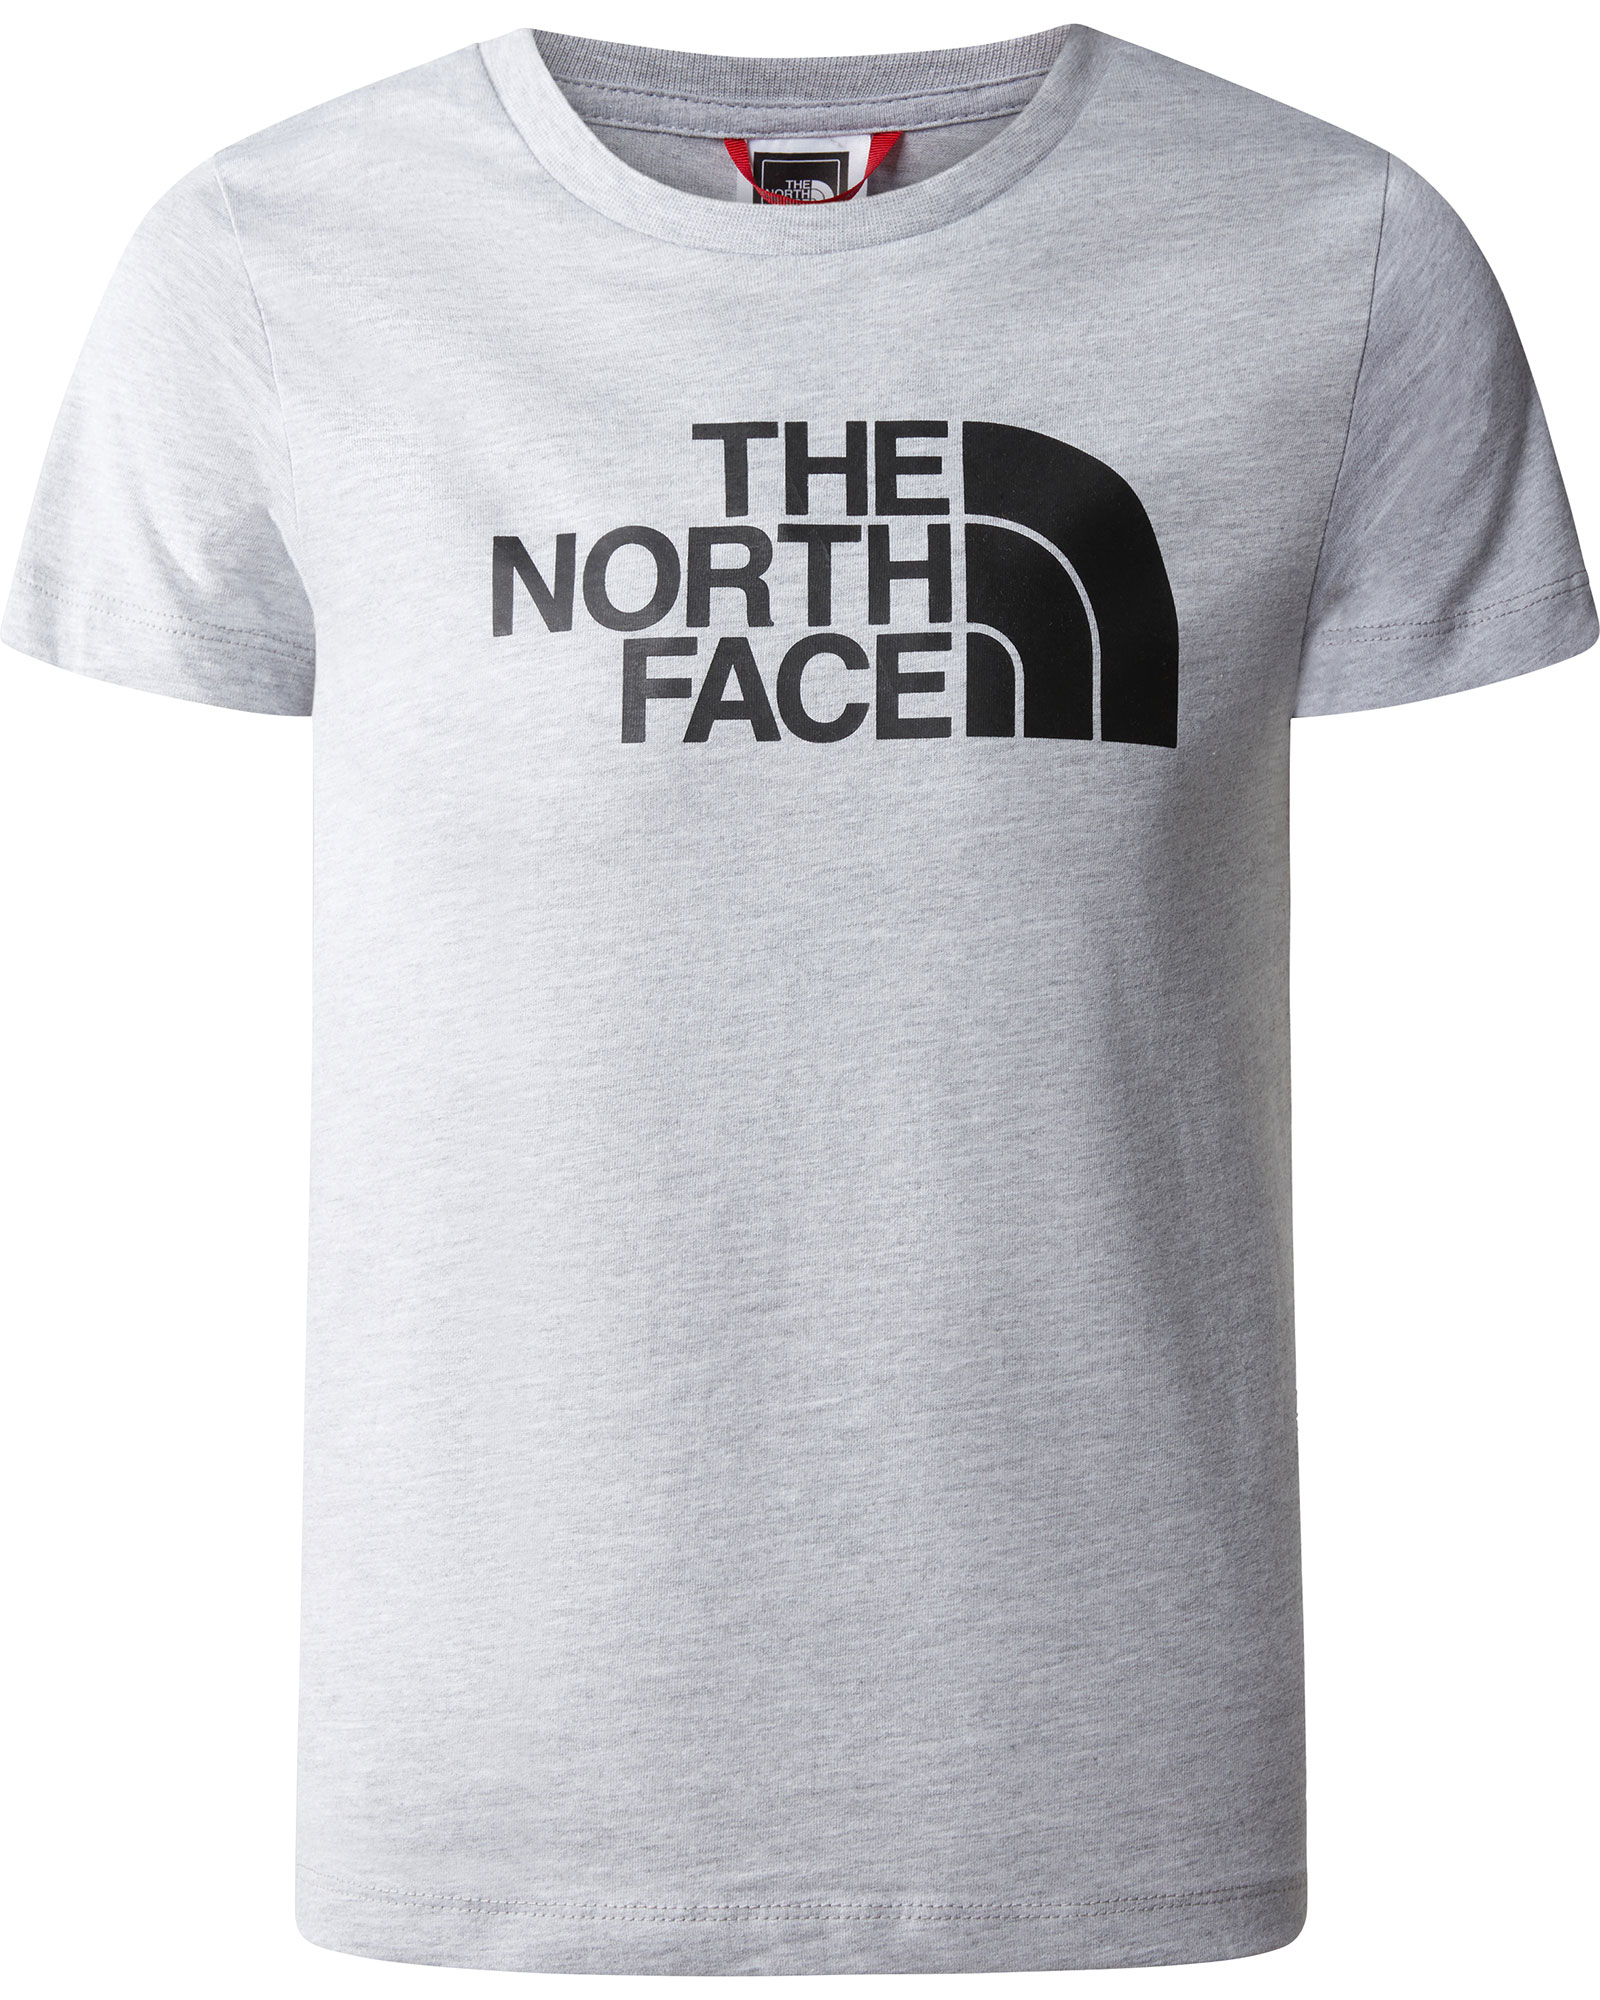 The North Face Boy’s Easy T Shirt - Light Grey Heather M